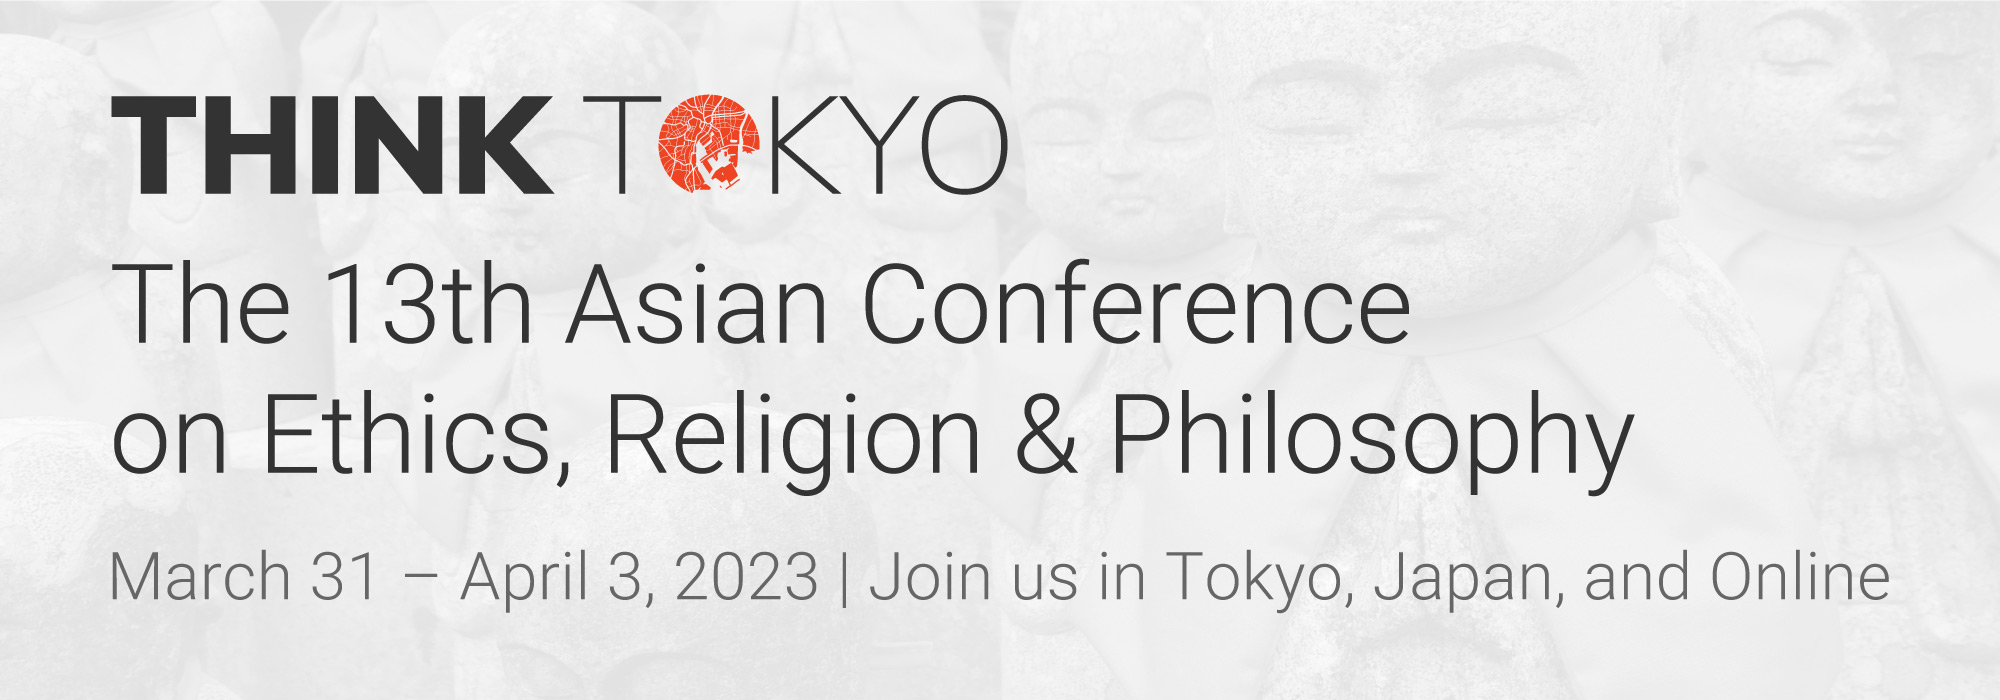 ACERP2023 The 13th Asian Conference on Ethics, Religion & Philosophy Logo